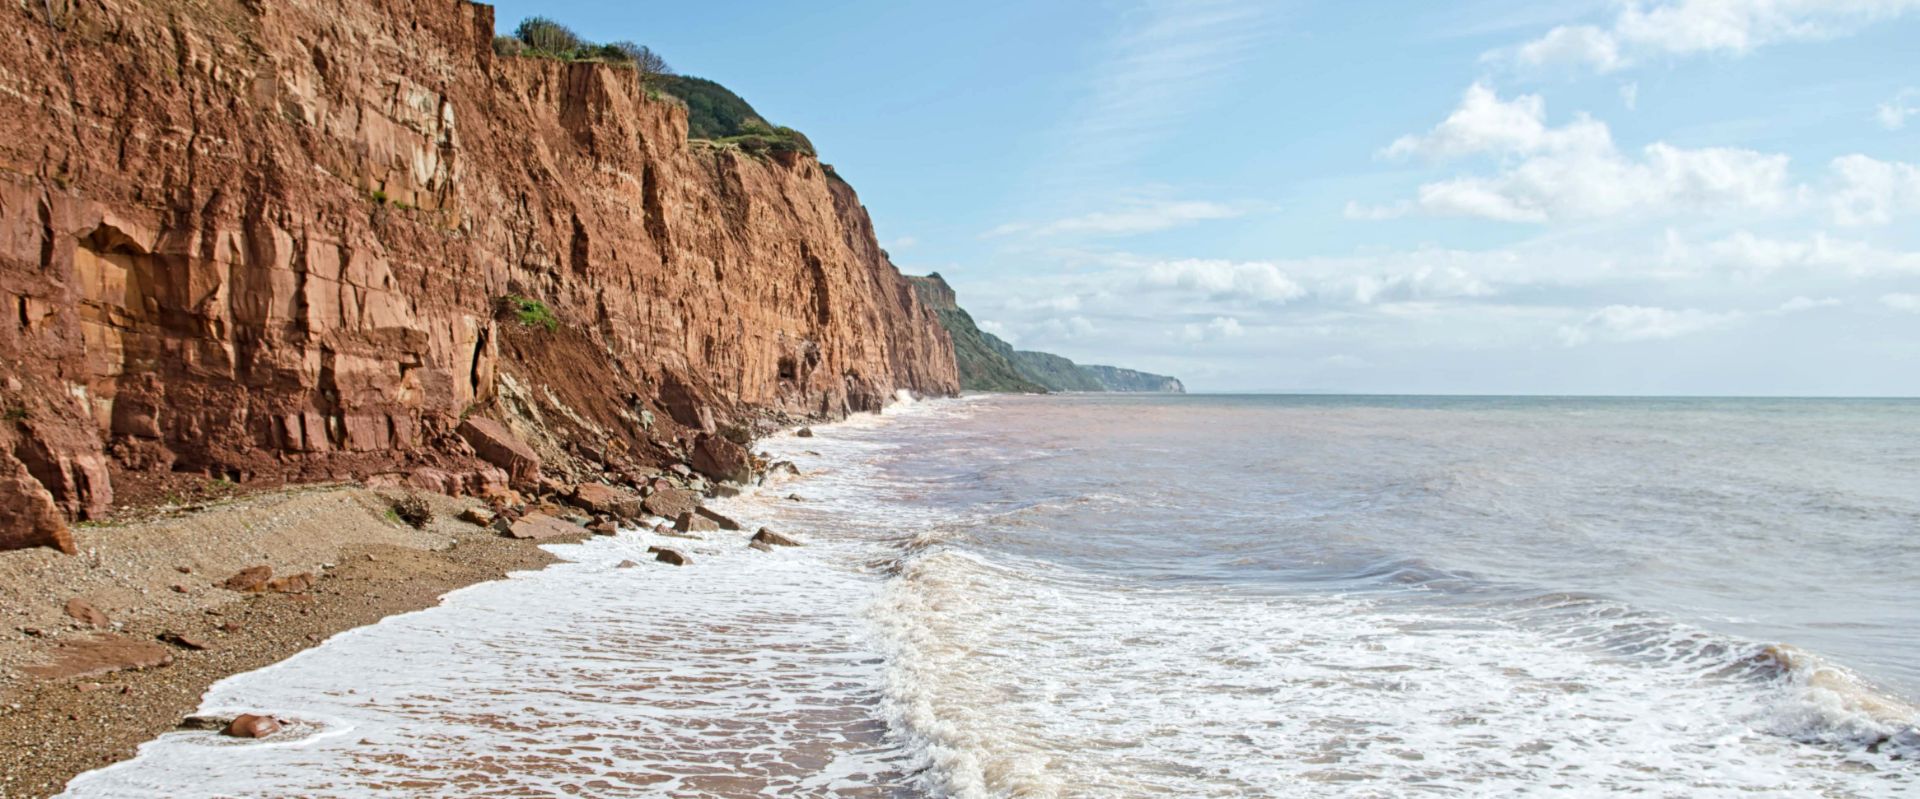 The red sandstone cliffs at Sidmouth